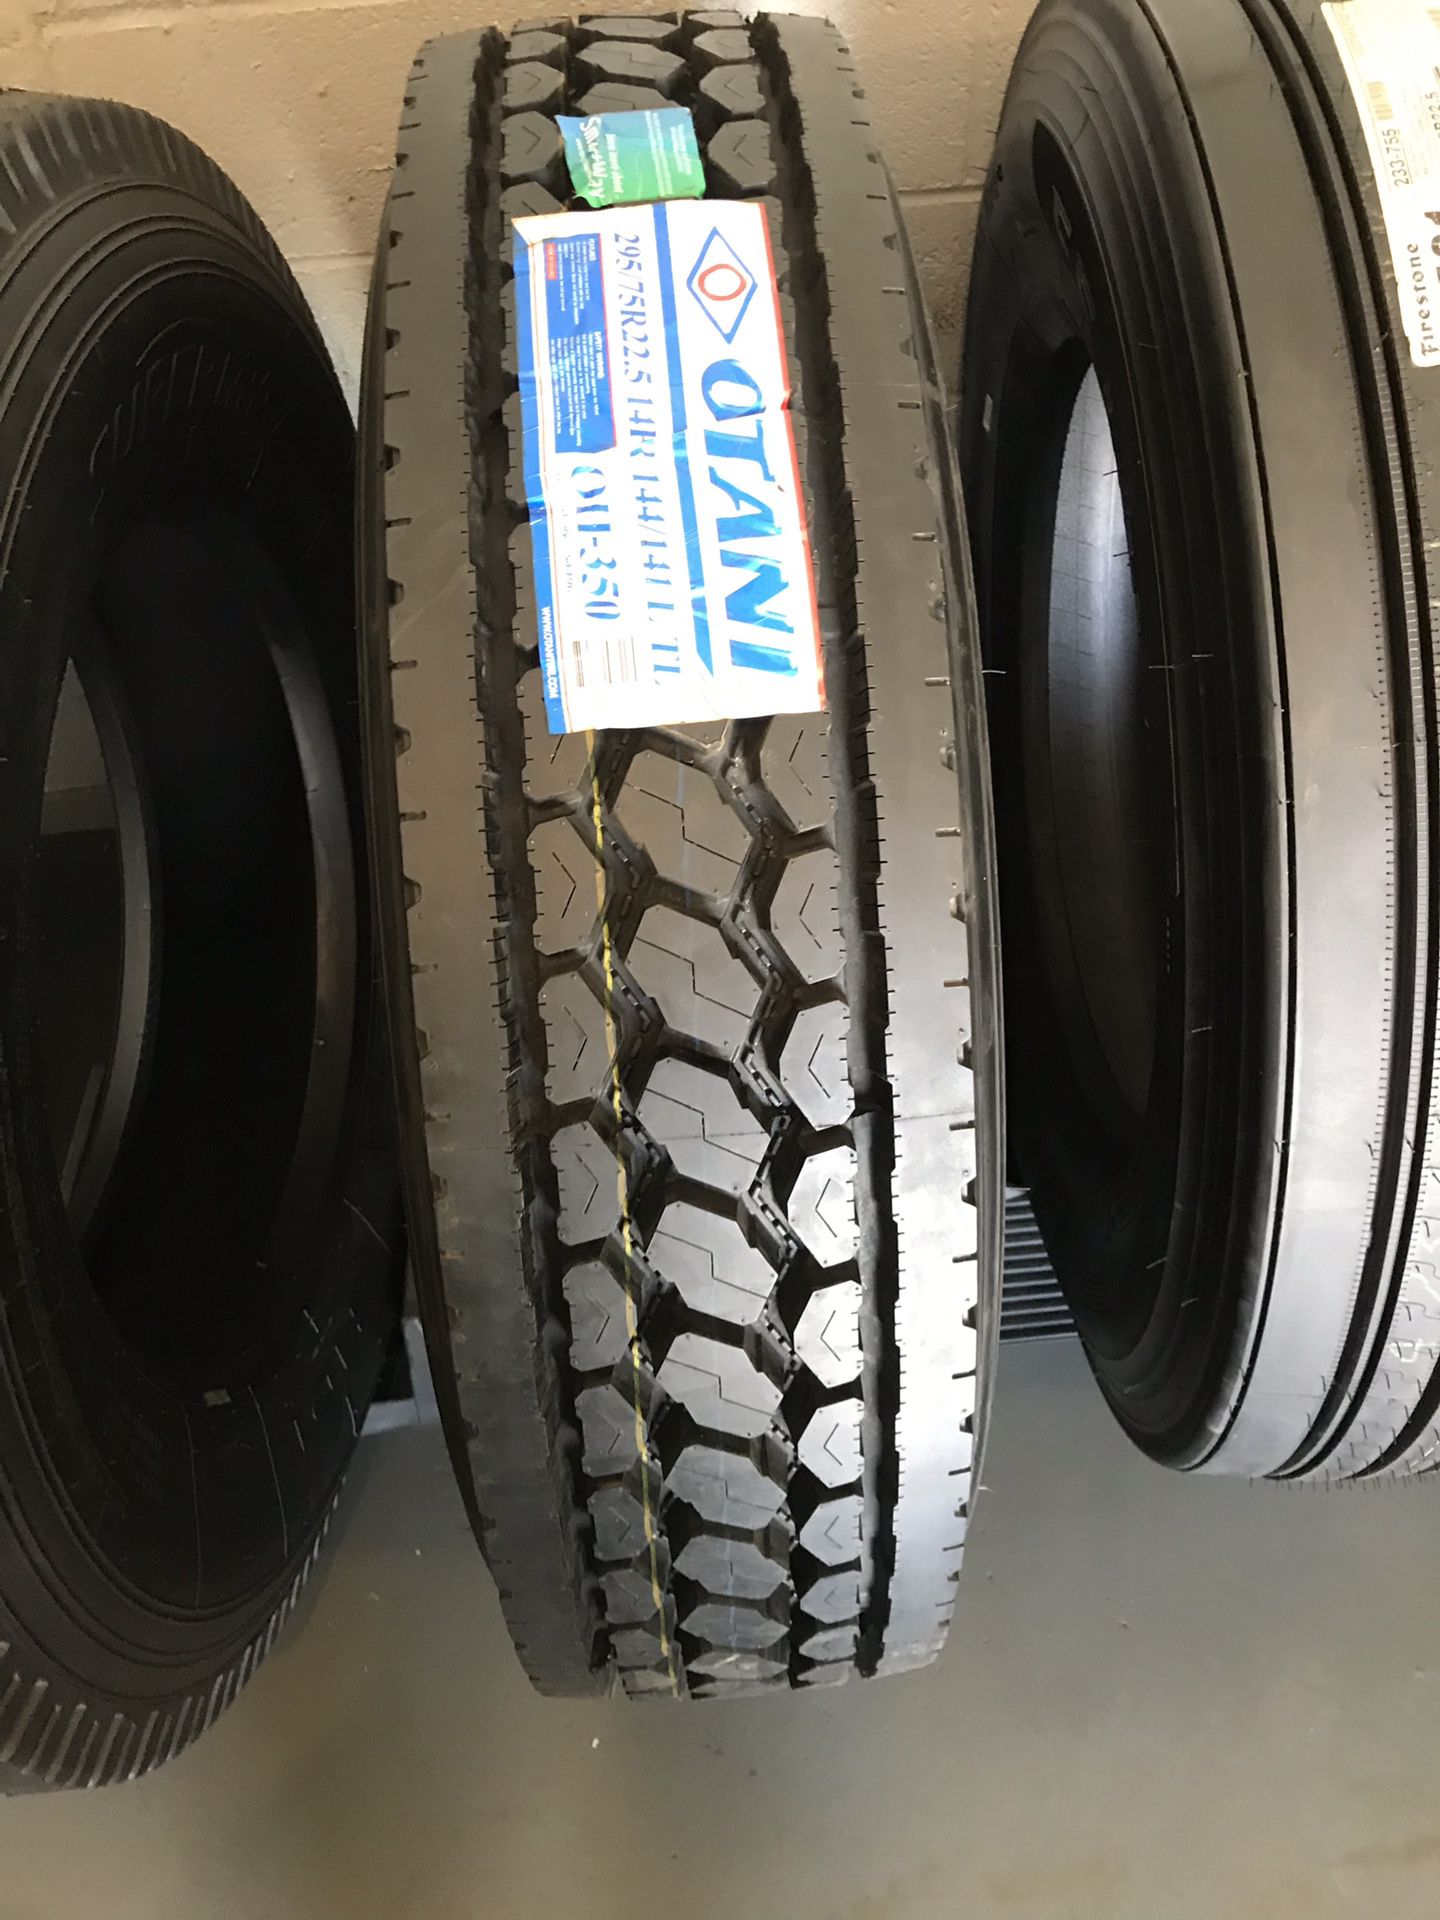 COMMERCIAL TRUCK AND TRAILER TIRES - LLANTAS PARA CAMION Y TRAILA (OTANI SMART WAY APPROVED 295/75R22.5 and 11R22.5 In STOCK!)